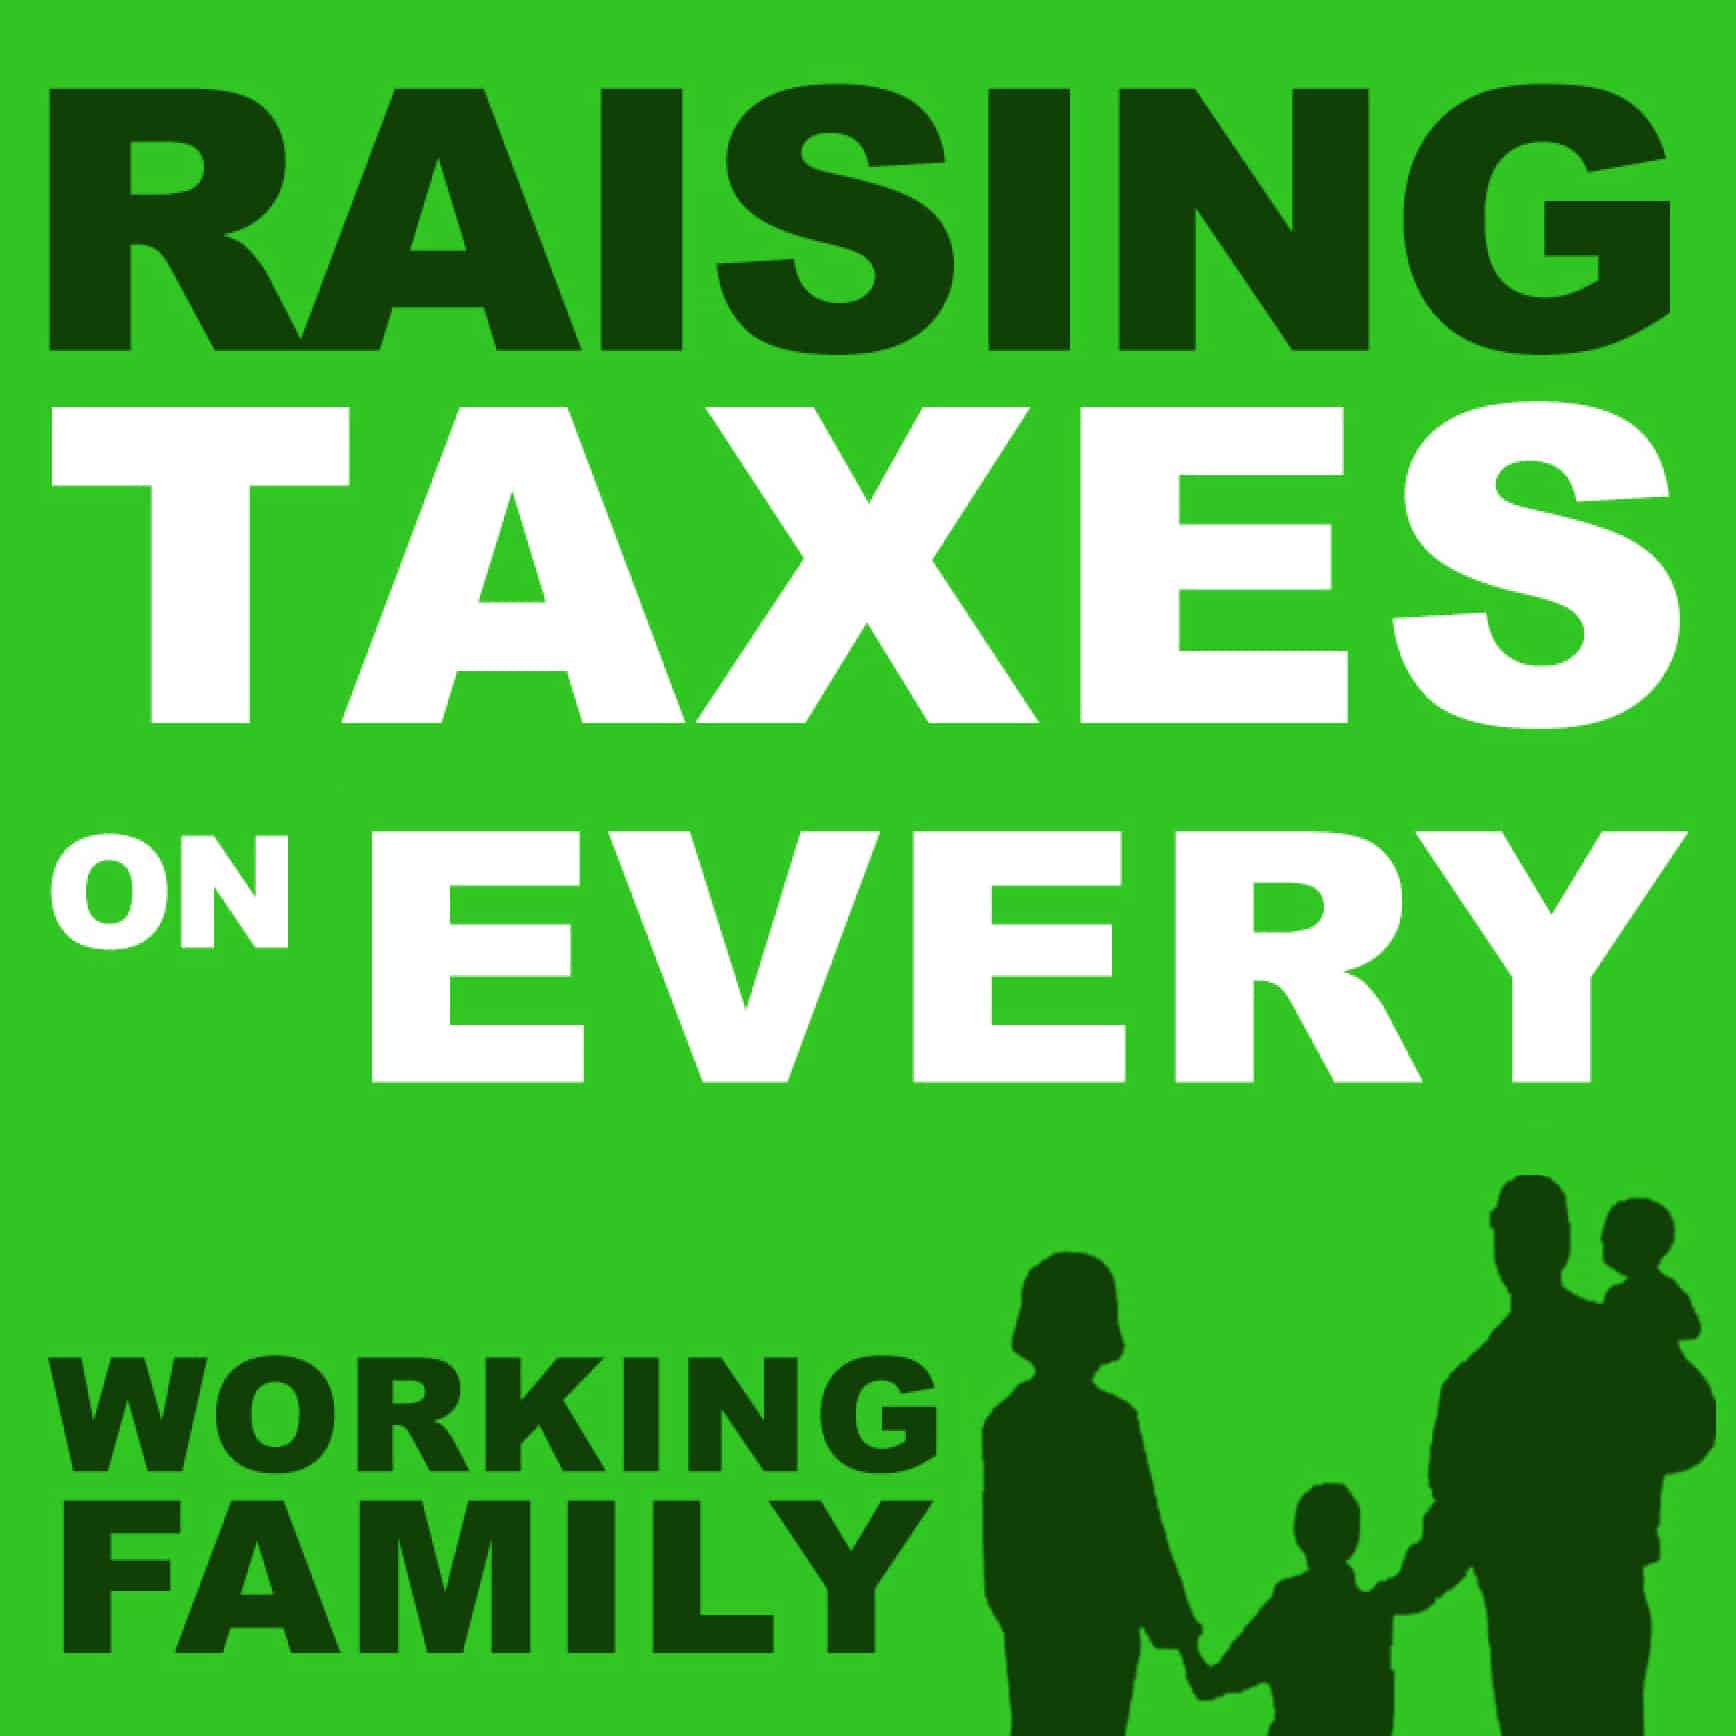 Senate Democrats increase taxes on every working family